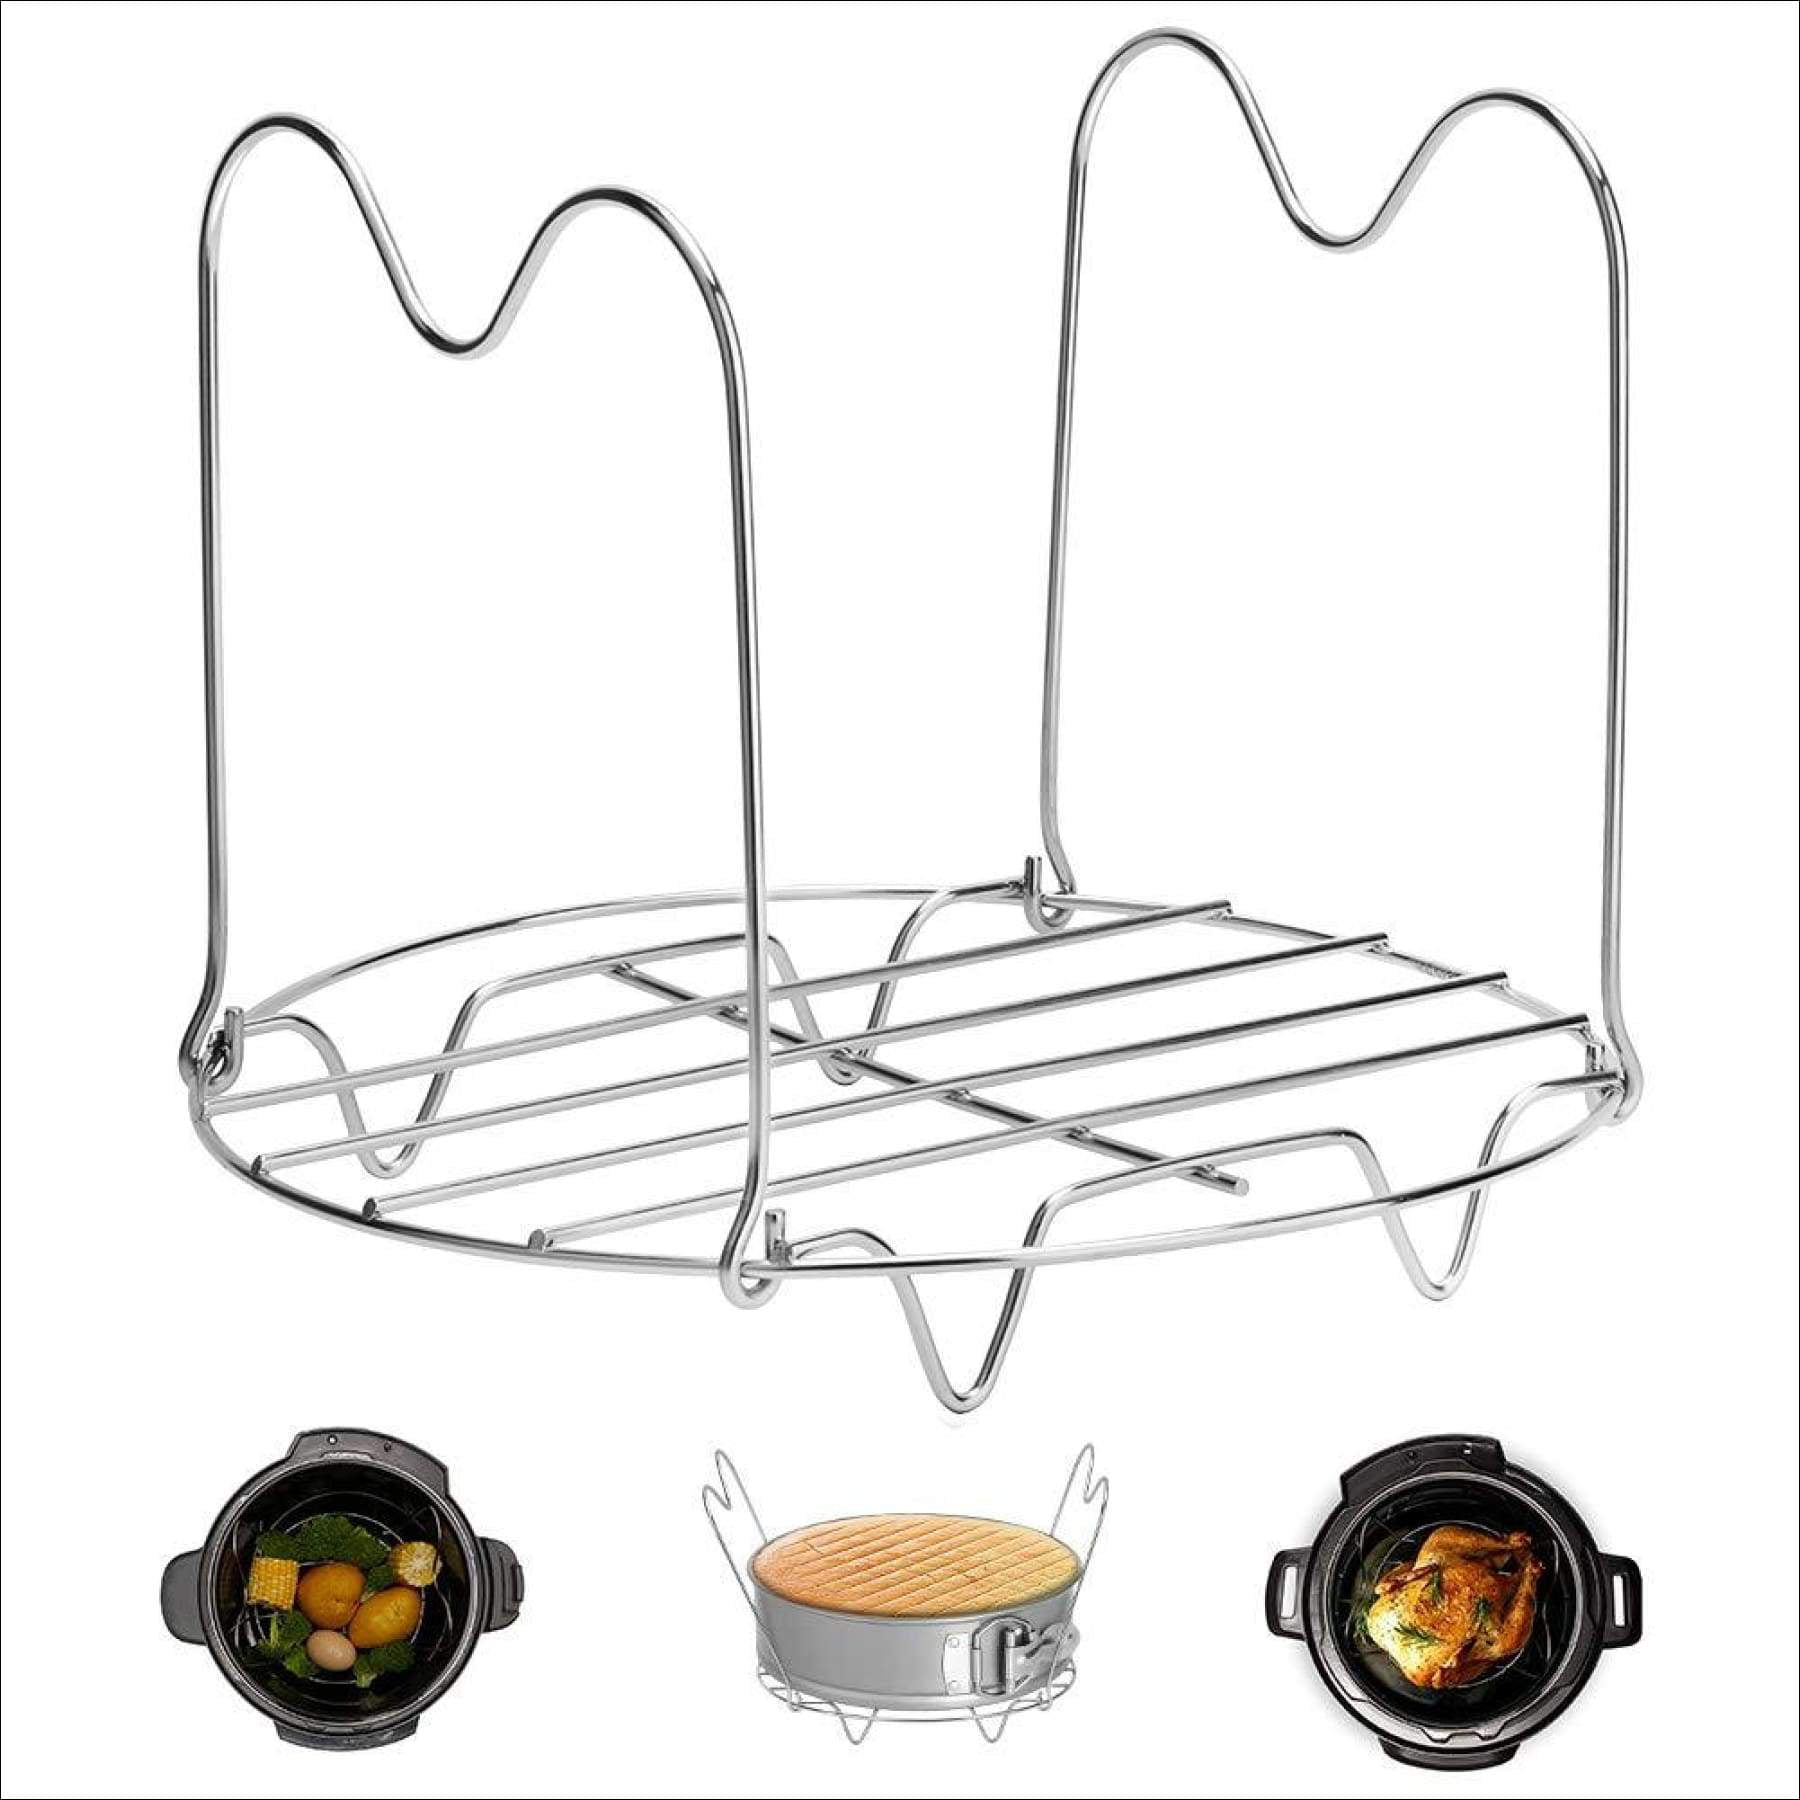 Stainless Steel Steaming Rack Trivet Stand for Pressure Cooker HapWay Egg Steamer Rack Trivet with Heat Resistant Silicone Handles Compatible with Instant Pot 6 & 8 qt Accessories